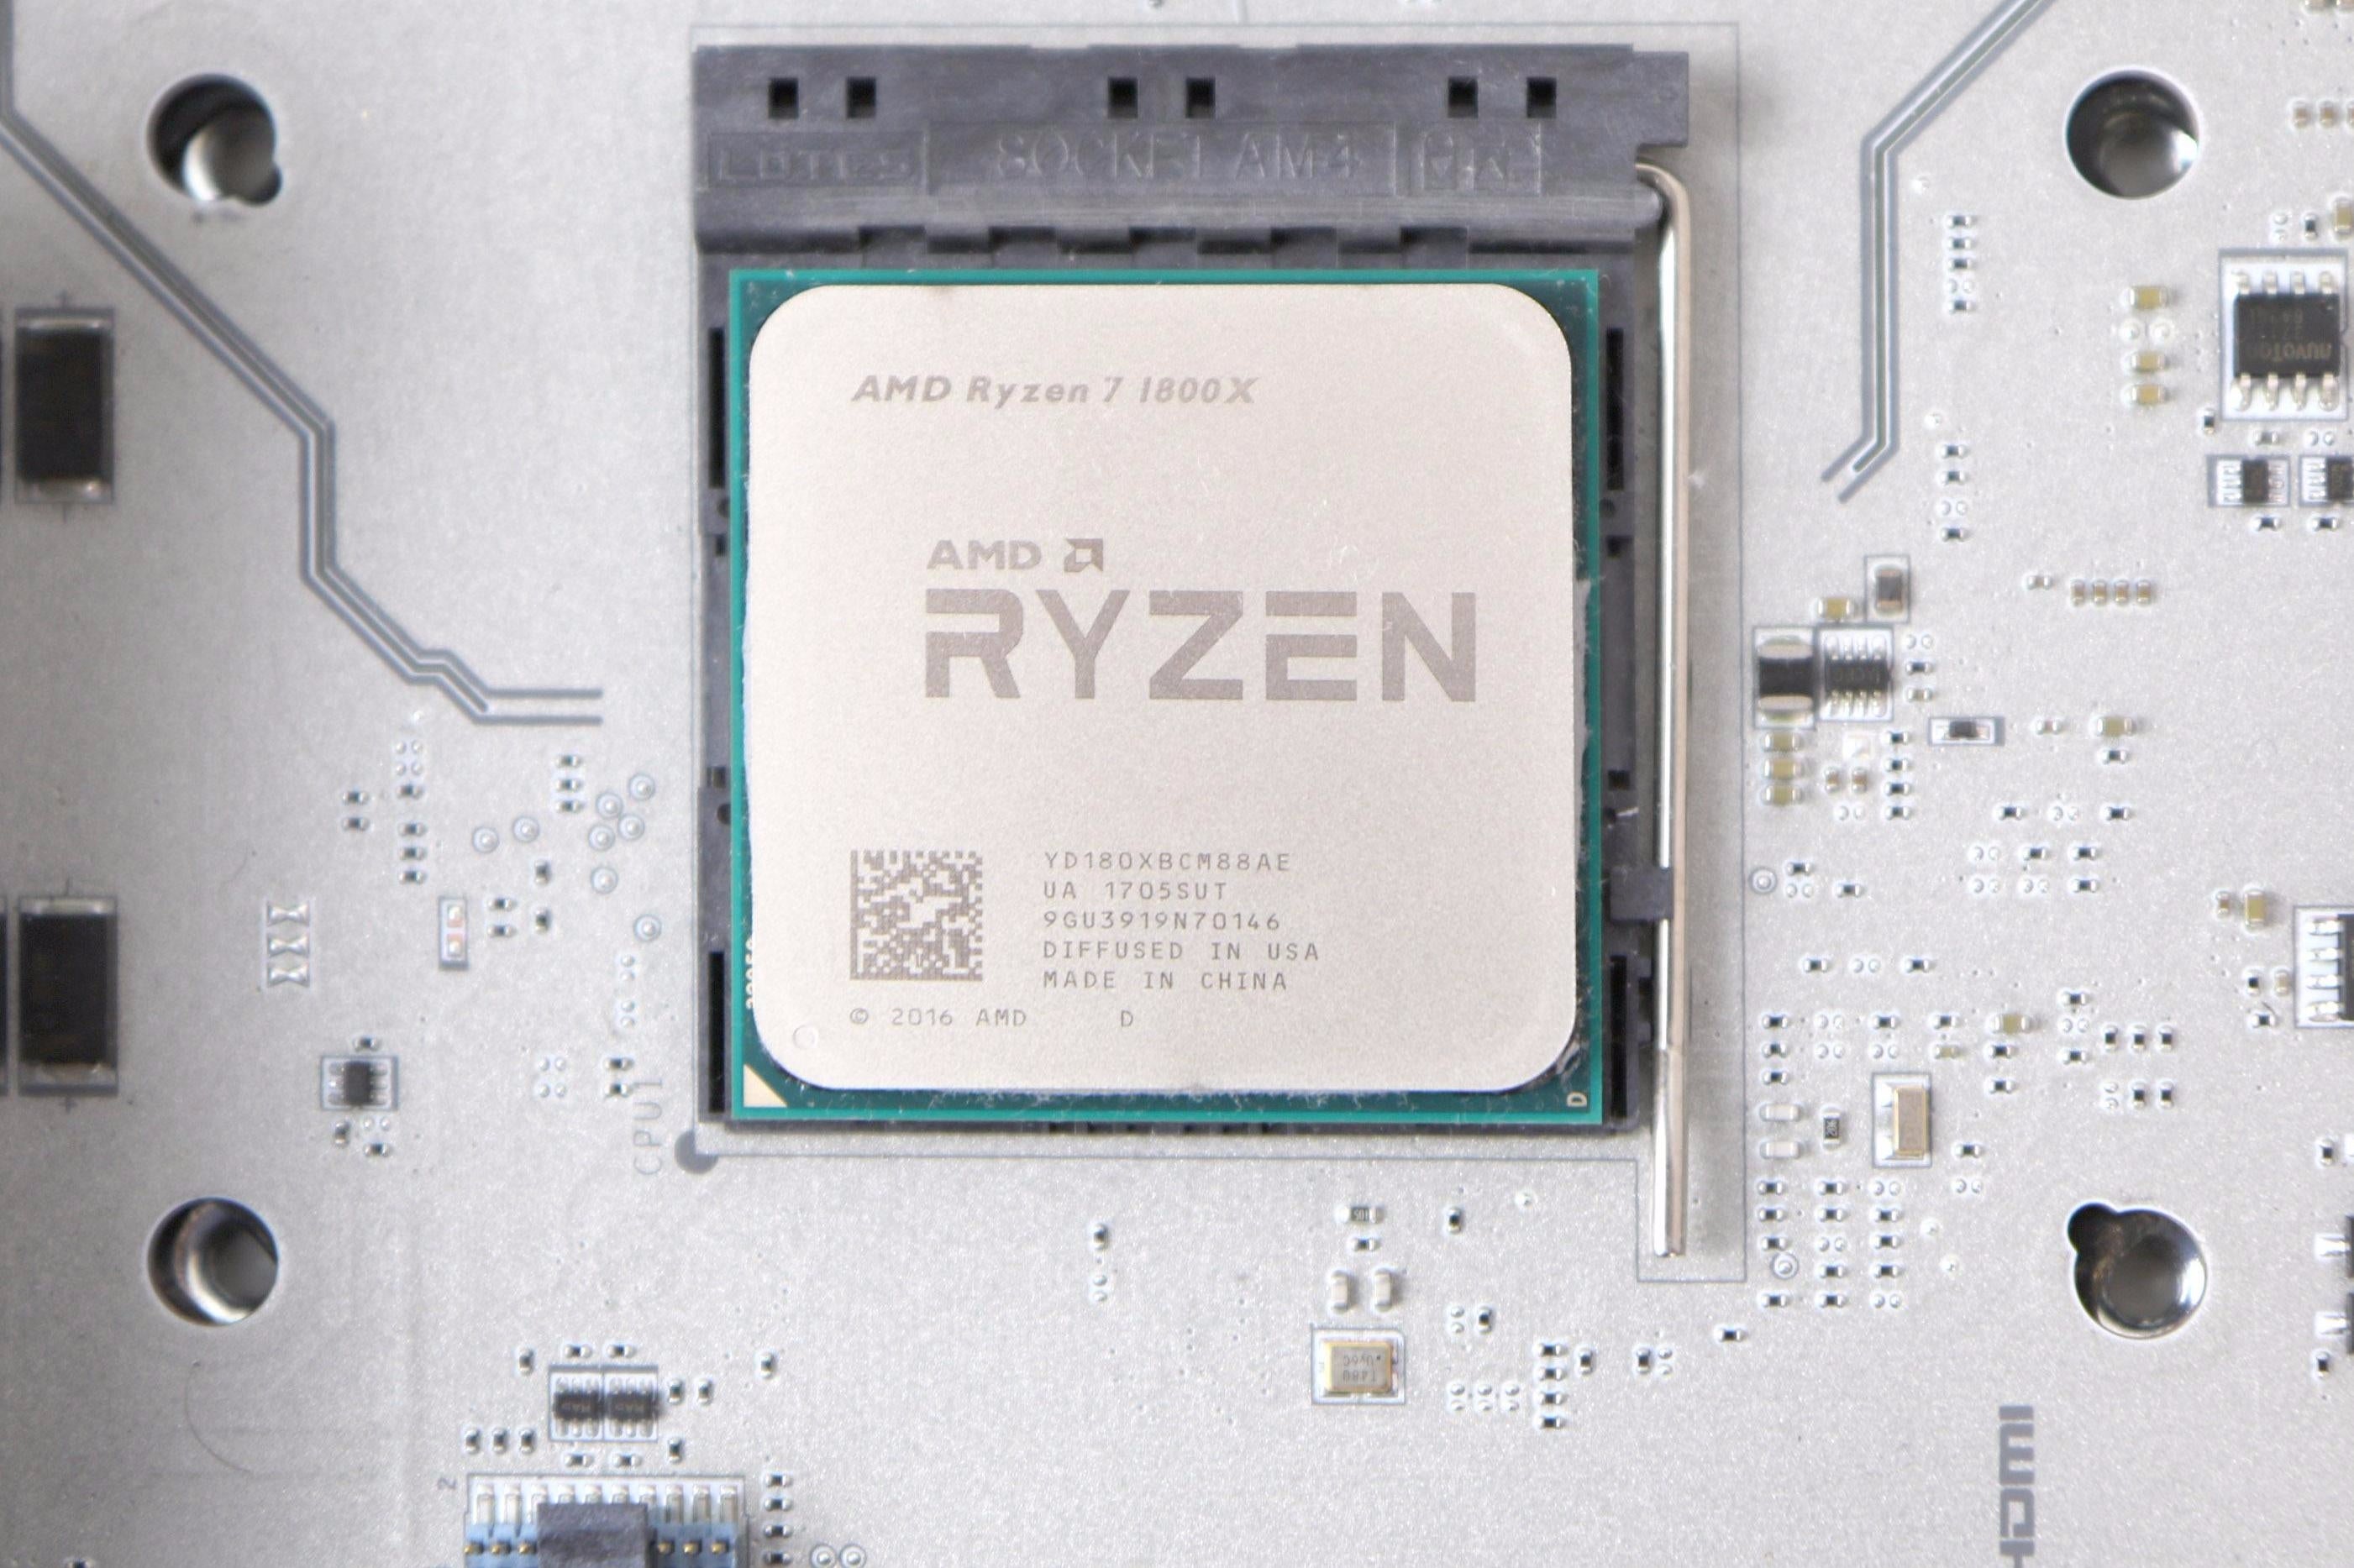 AMD Ryzen 7 1800X review: what's the real story with gaming 